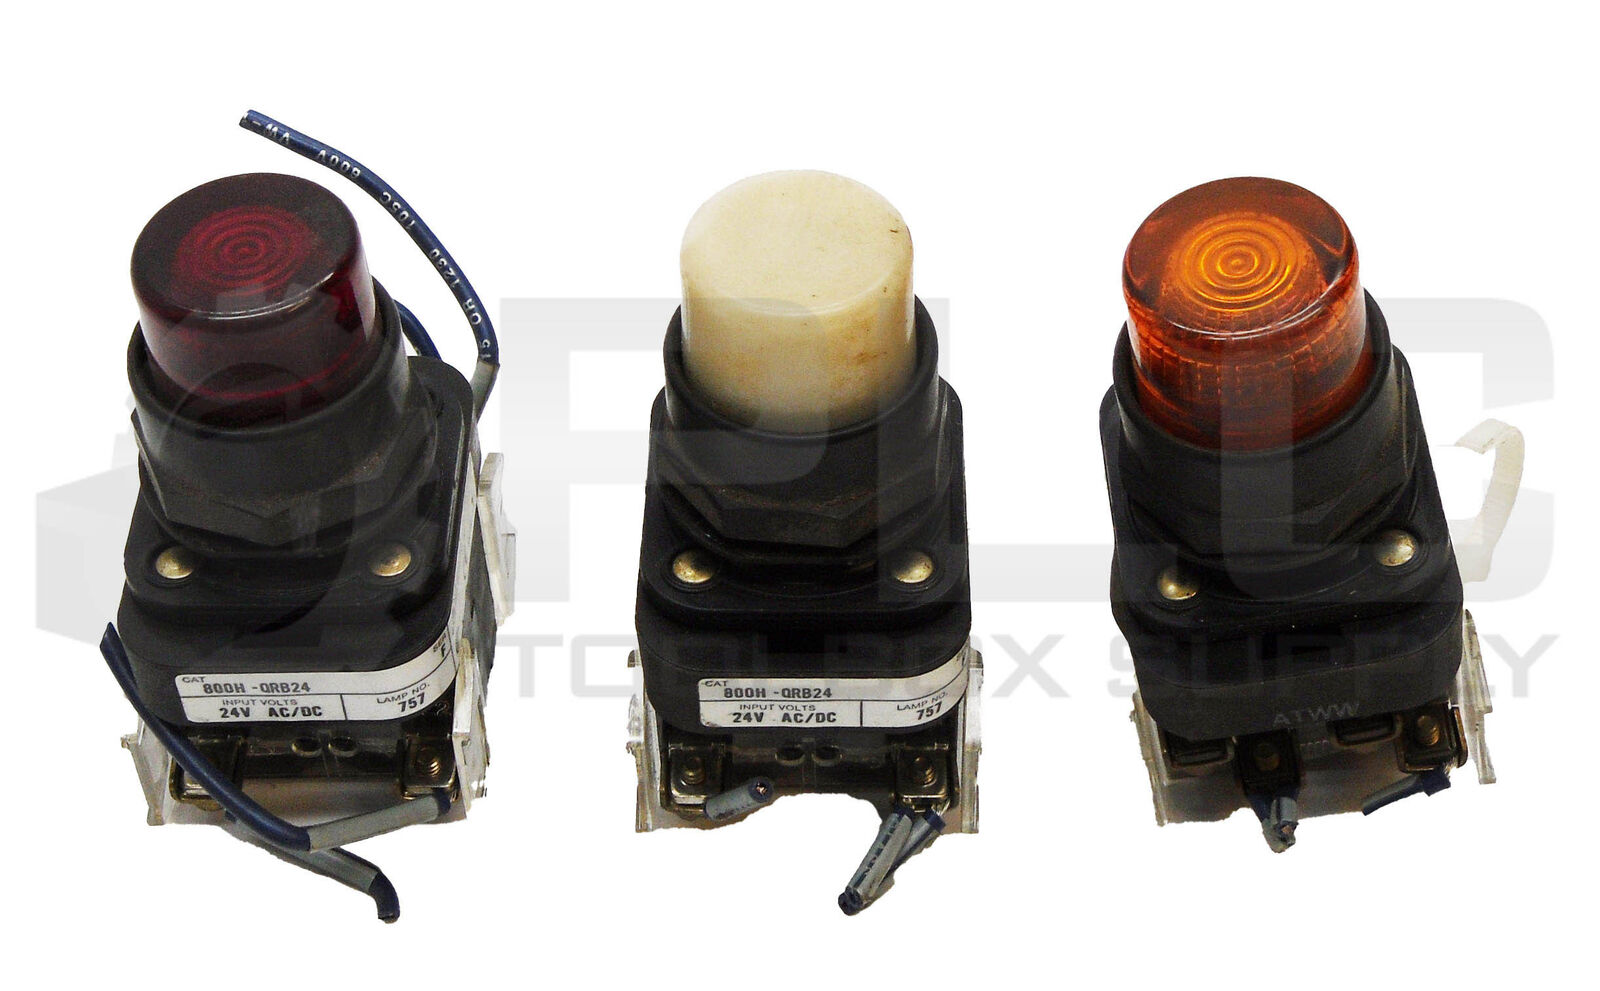 LOT OF 3 ALLEN BRADLEY 800H-QRB24 /F PUSH BUTTON MIXED COLORS RED AMBER WHITE